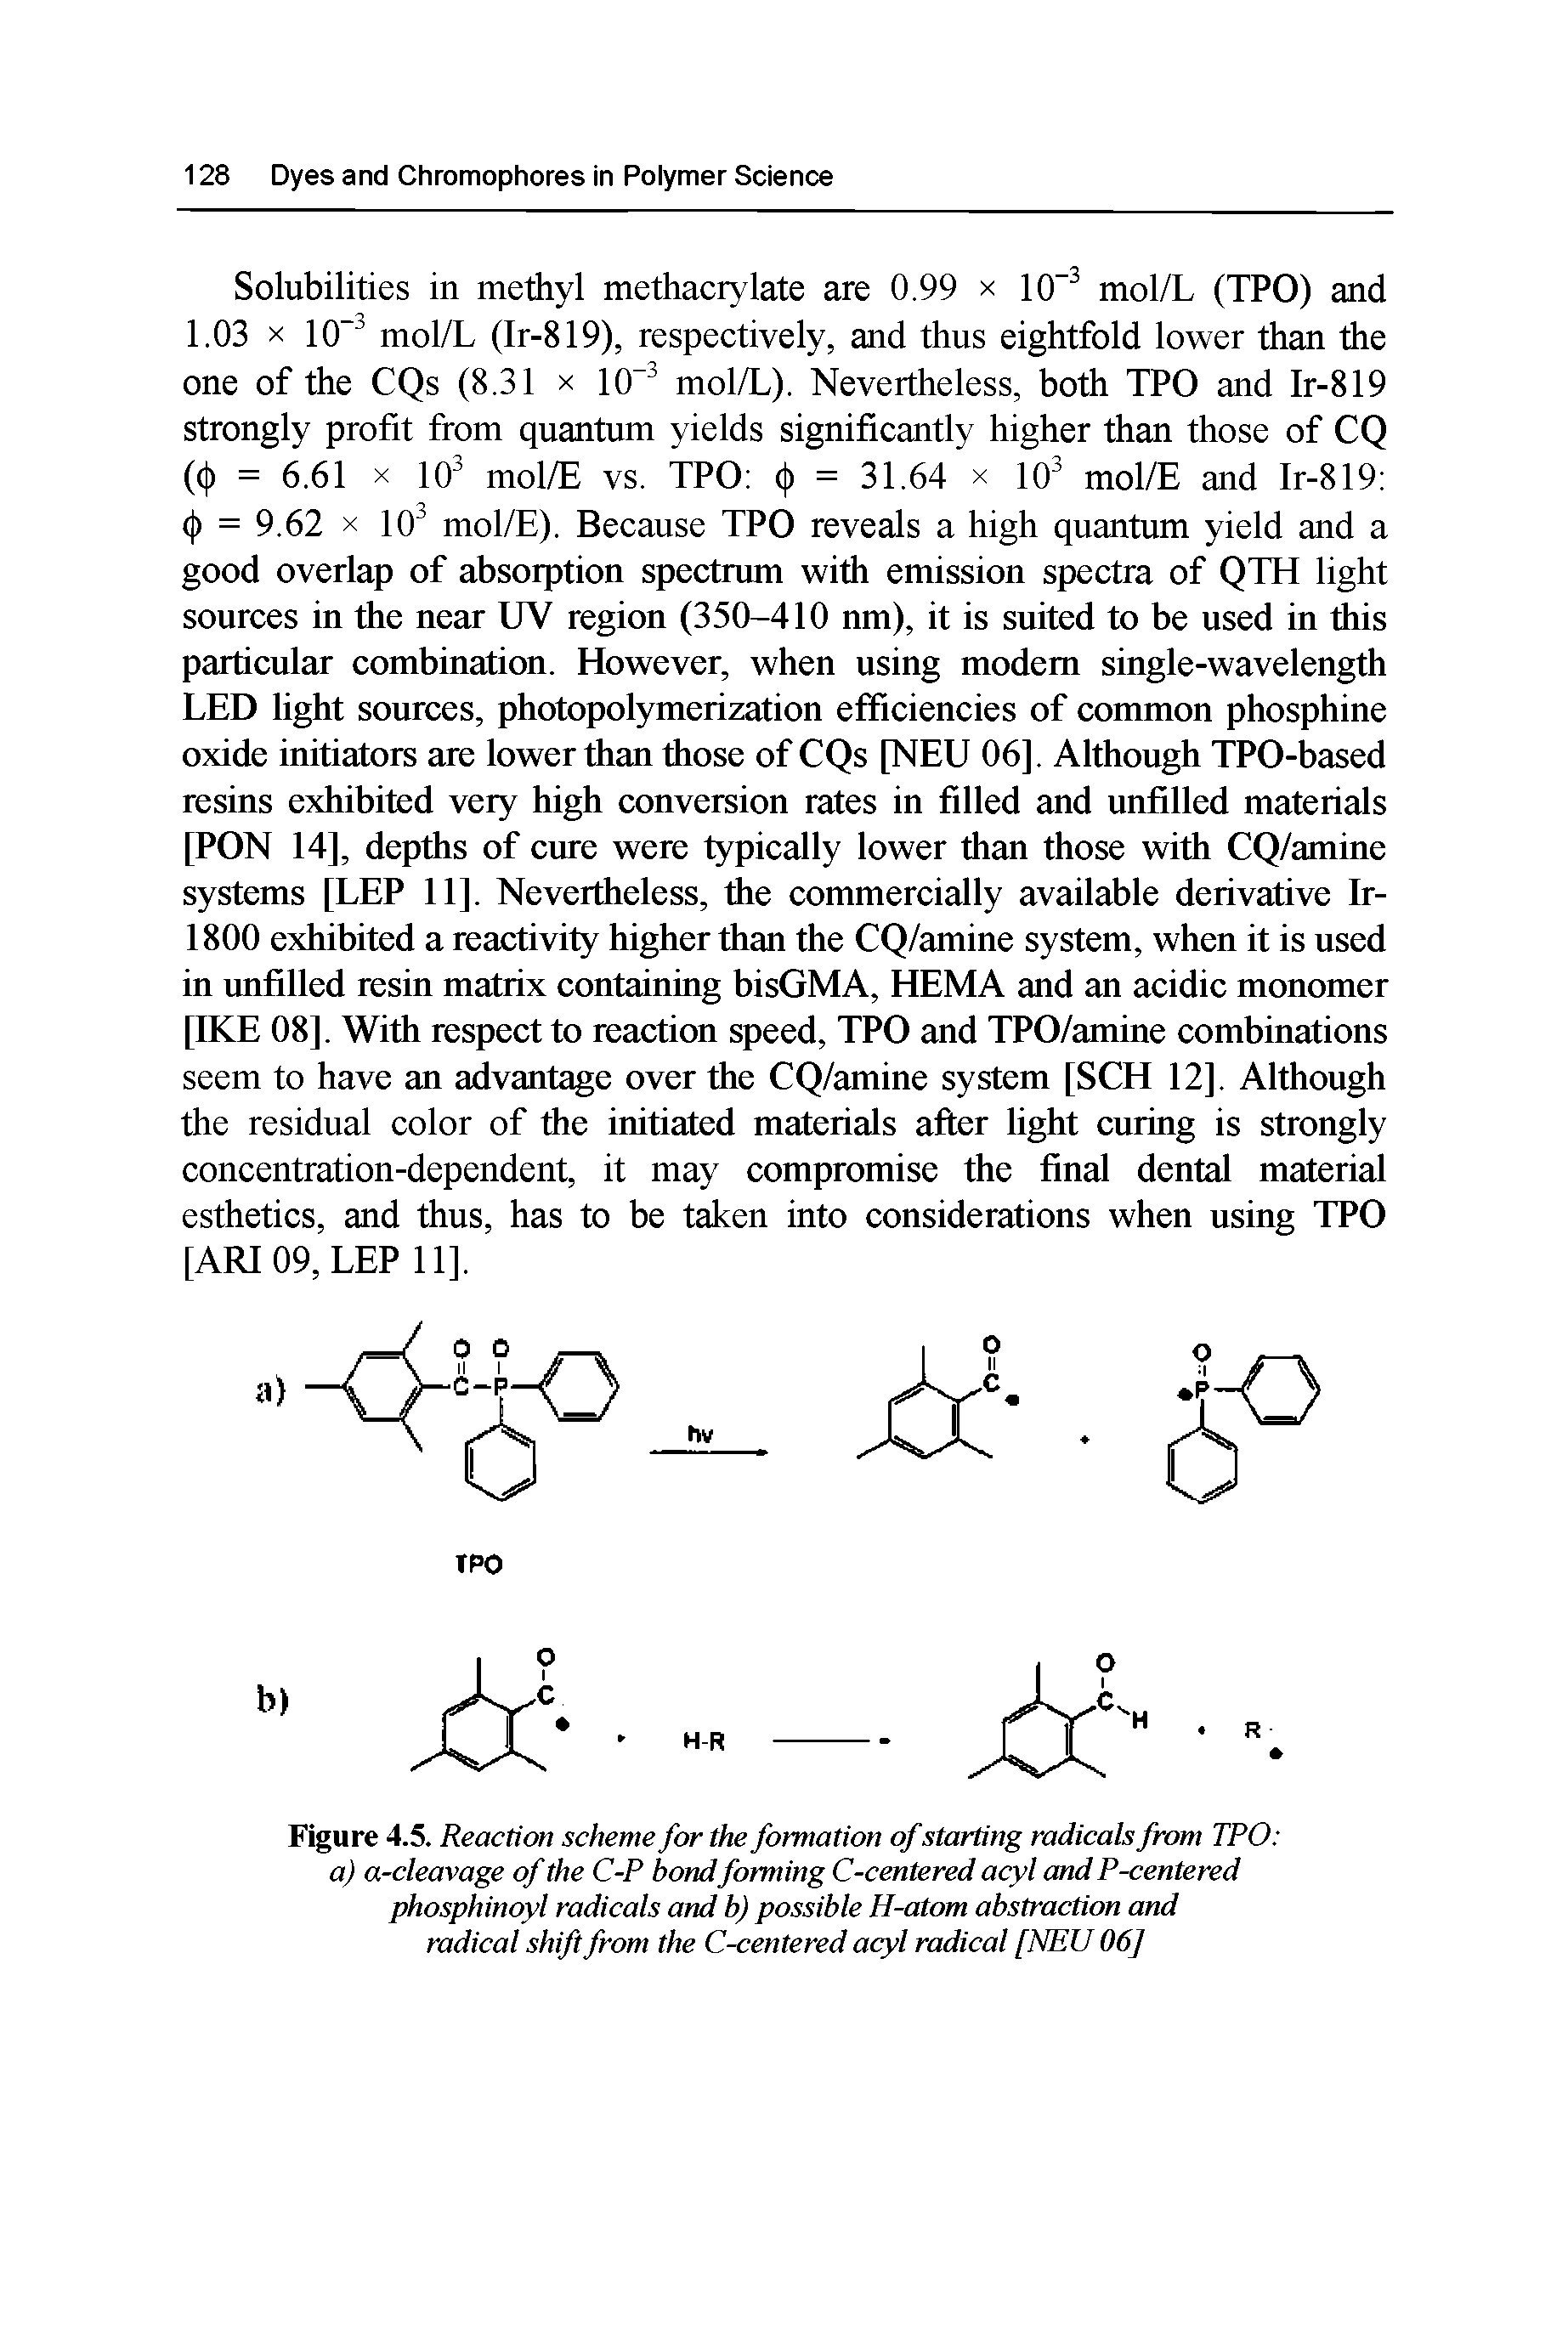 Figure 4.5. Reaction scheme for the formation ofstarting radicals from TPO a) a-cleavage of the C-P bondforming C-centered acyl and P-centered phosphinoyl radicals and b) possible H-atom abstraction and radical shift from the C-centered acyl radical [NEU 06]...